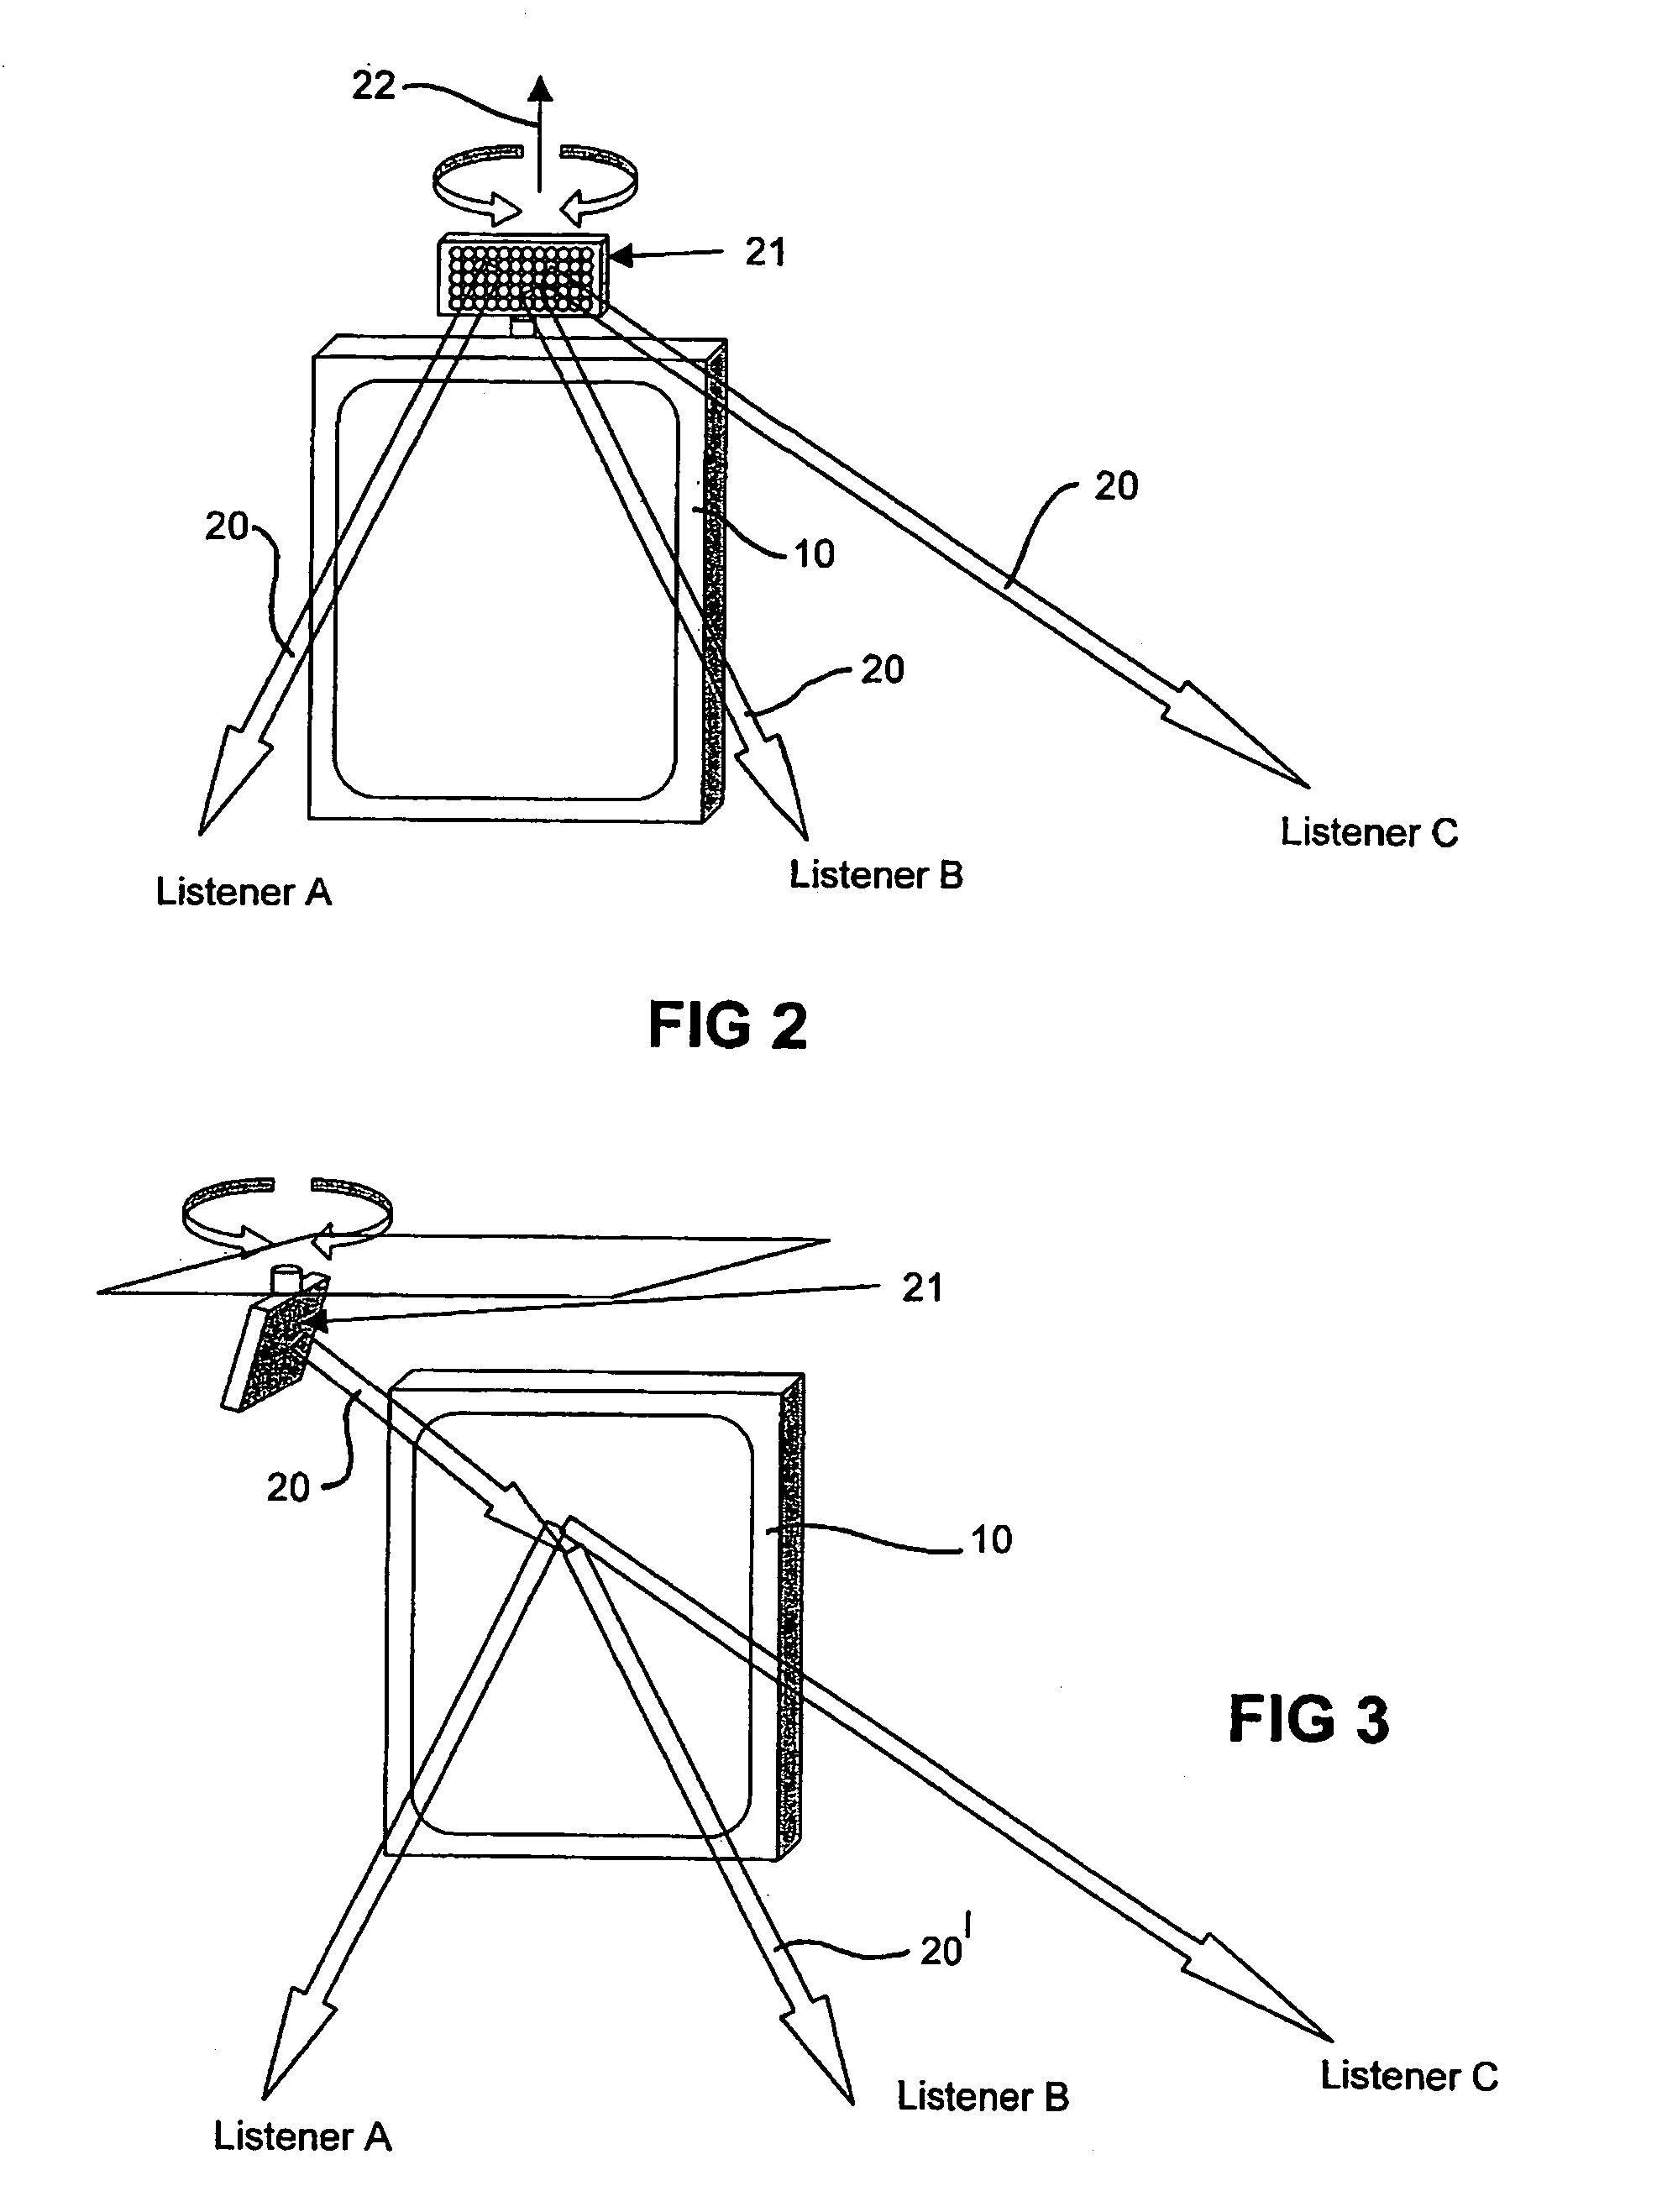 Steering of directional sound beams